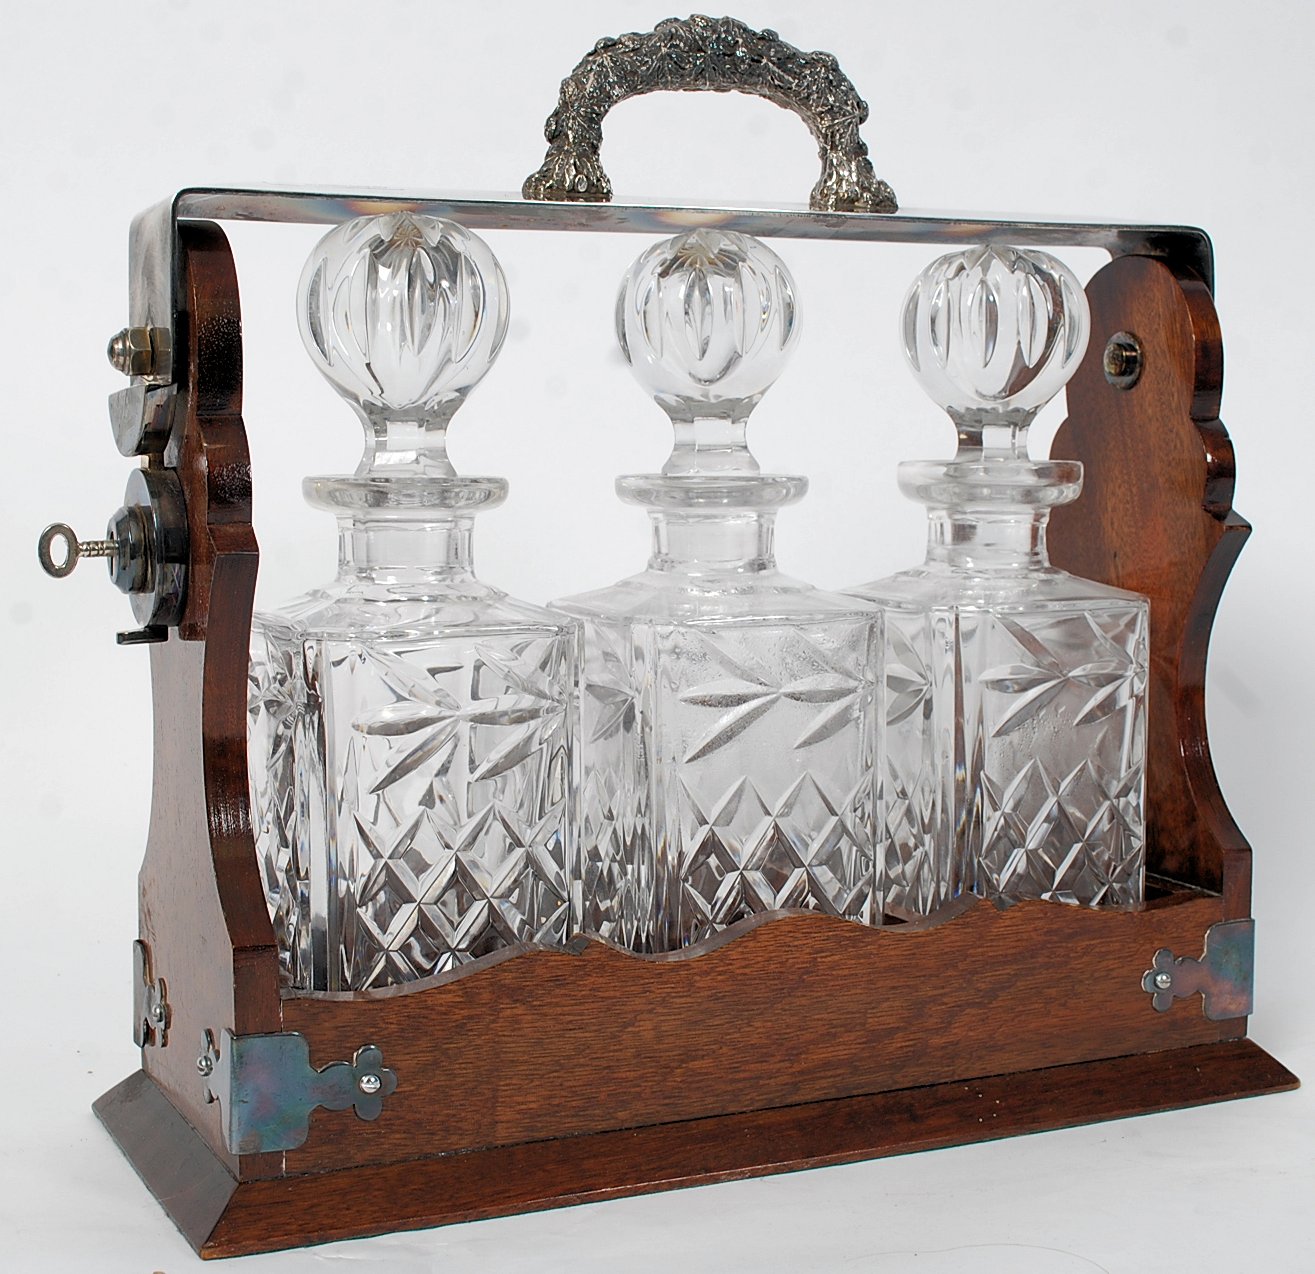 A 19th century Victorian oak and silver plated Tantalus with ornate ivy epns handle and mounting